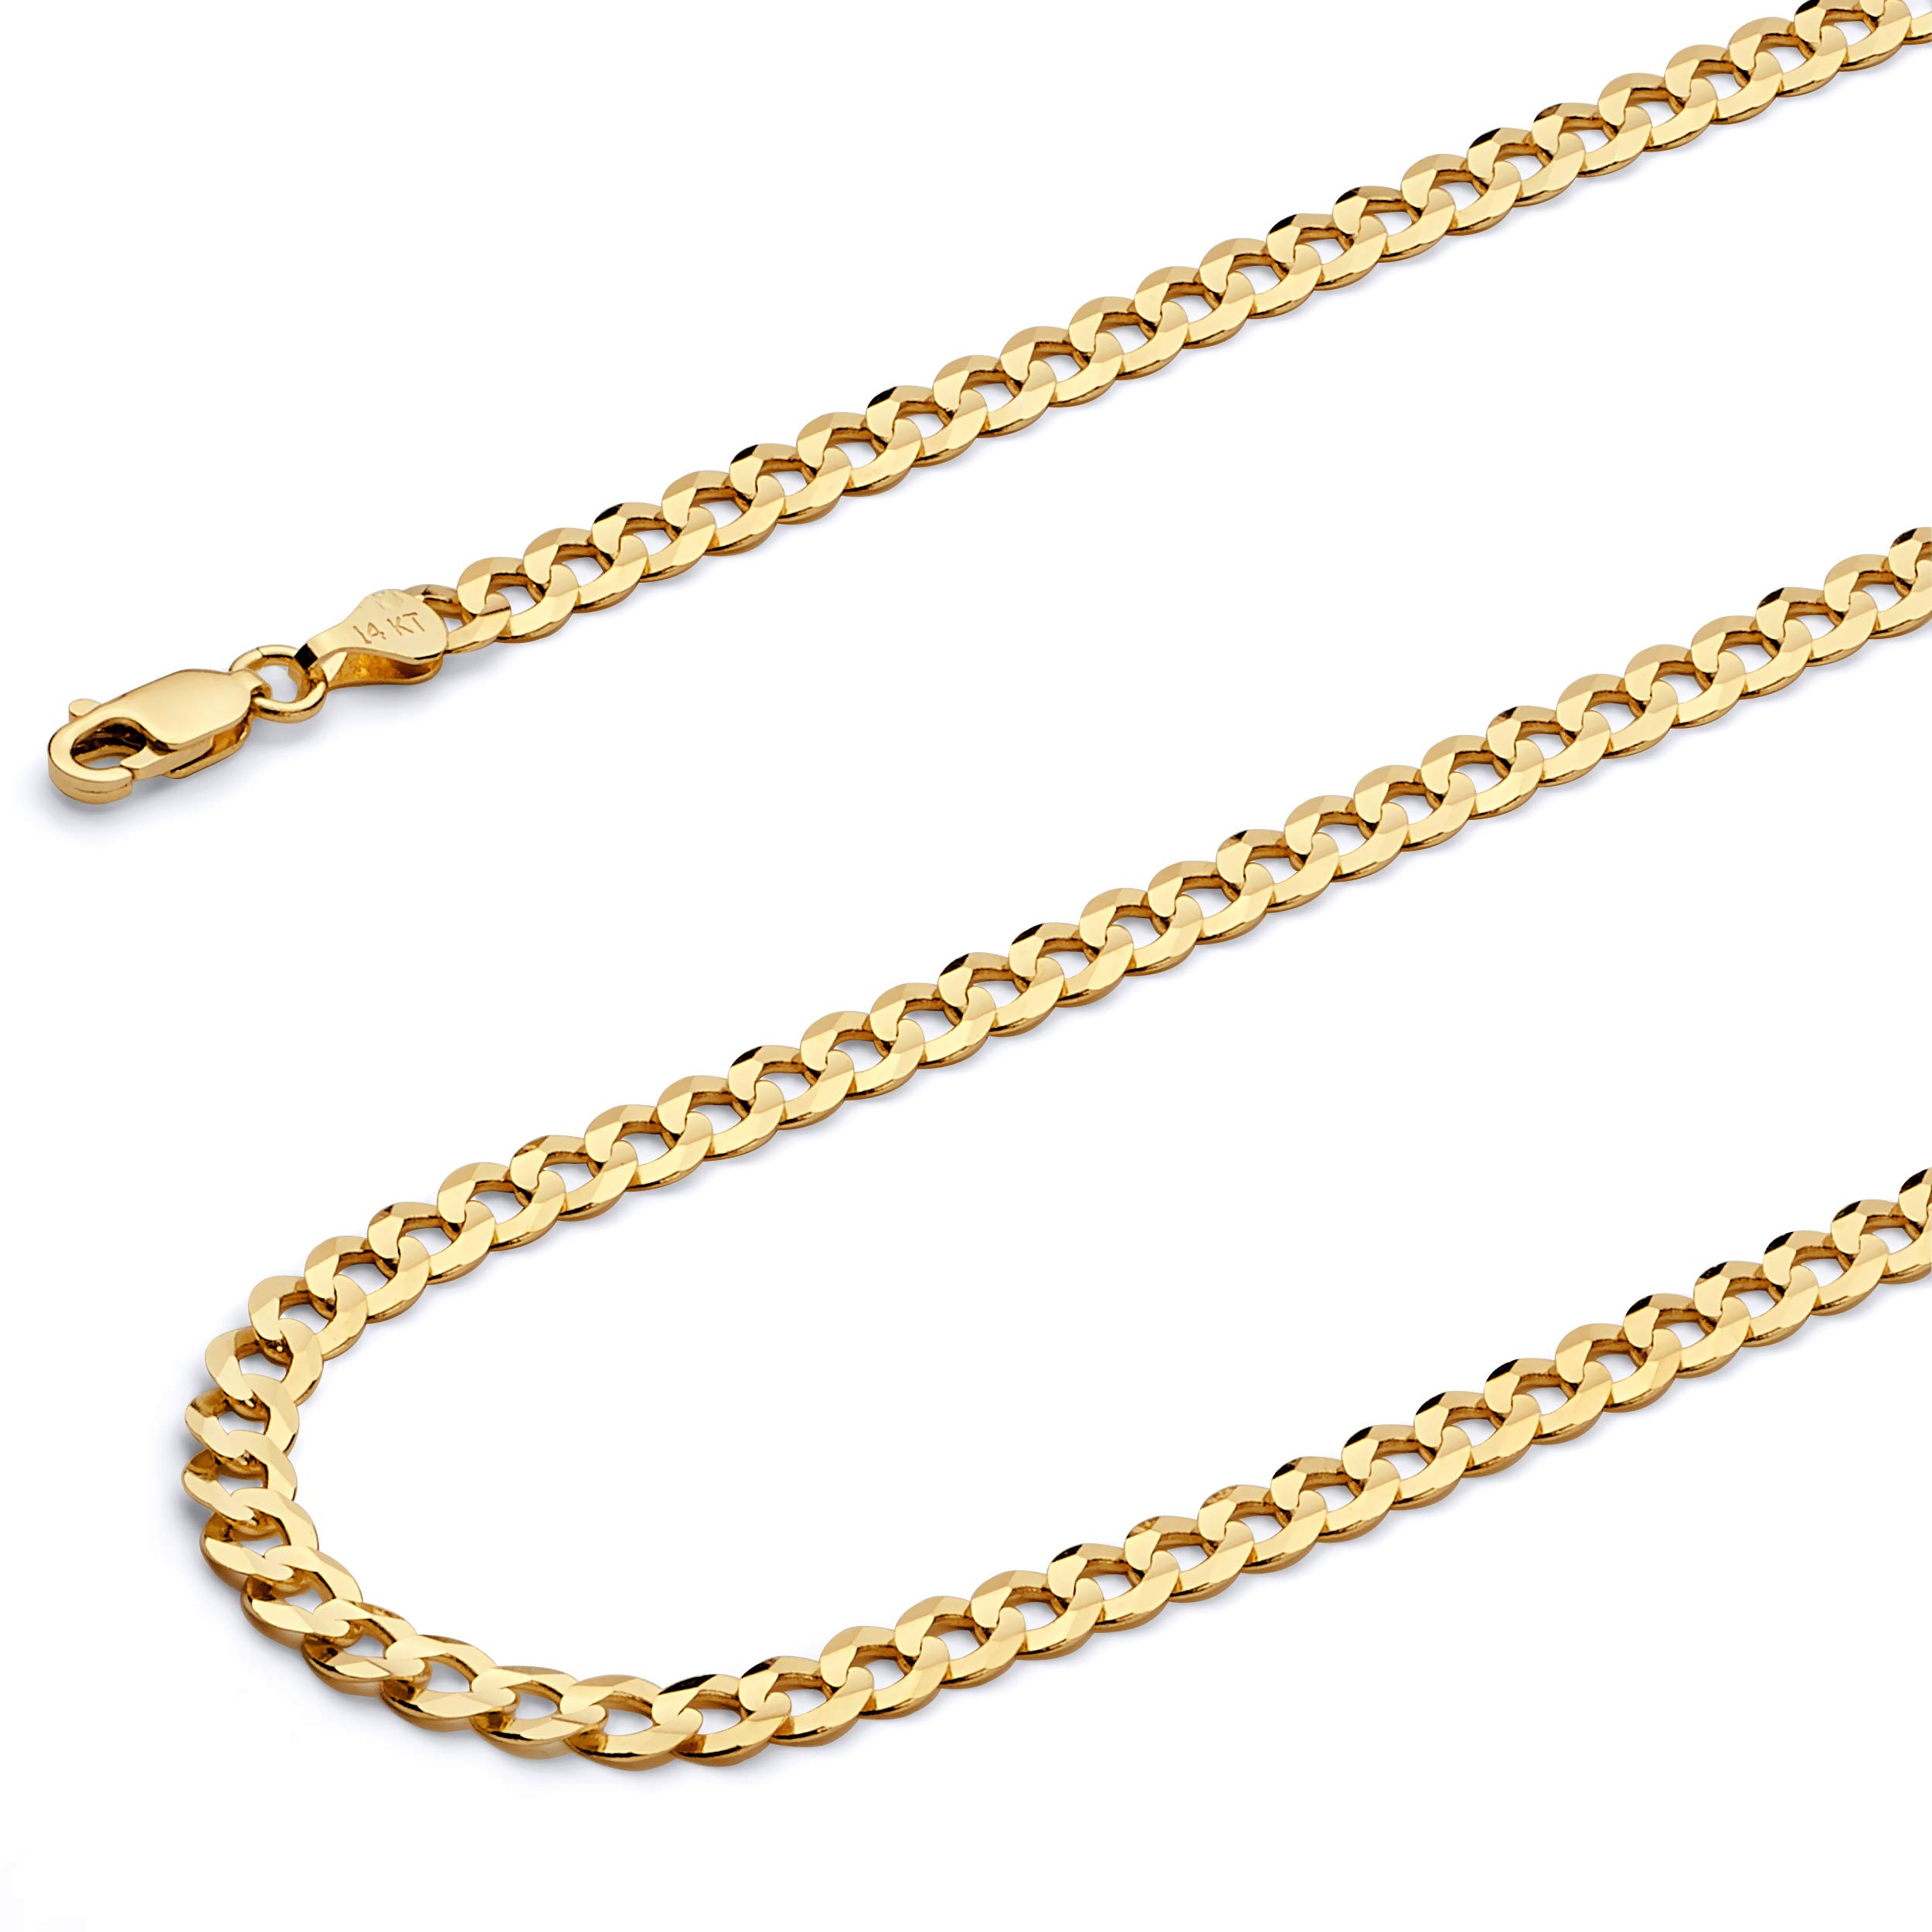 14k REAL Yellow Gold Solid Men's 3.5mm Cuban Curb Chain Necklace with Lobster Claw Clasp